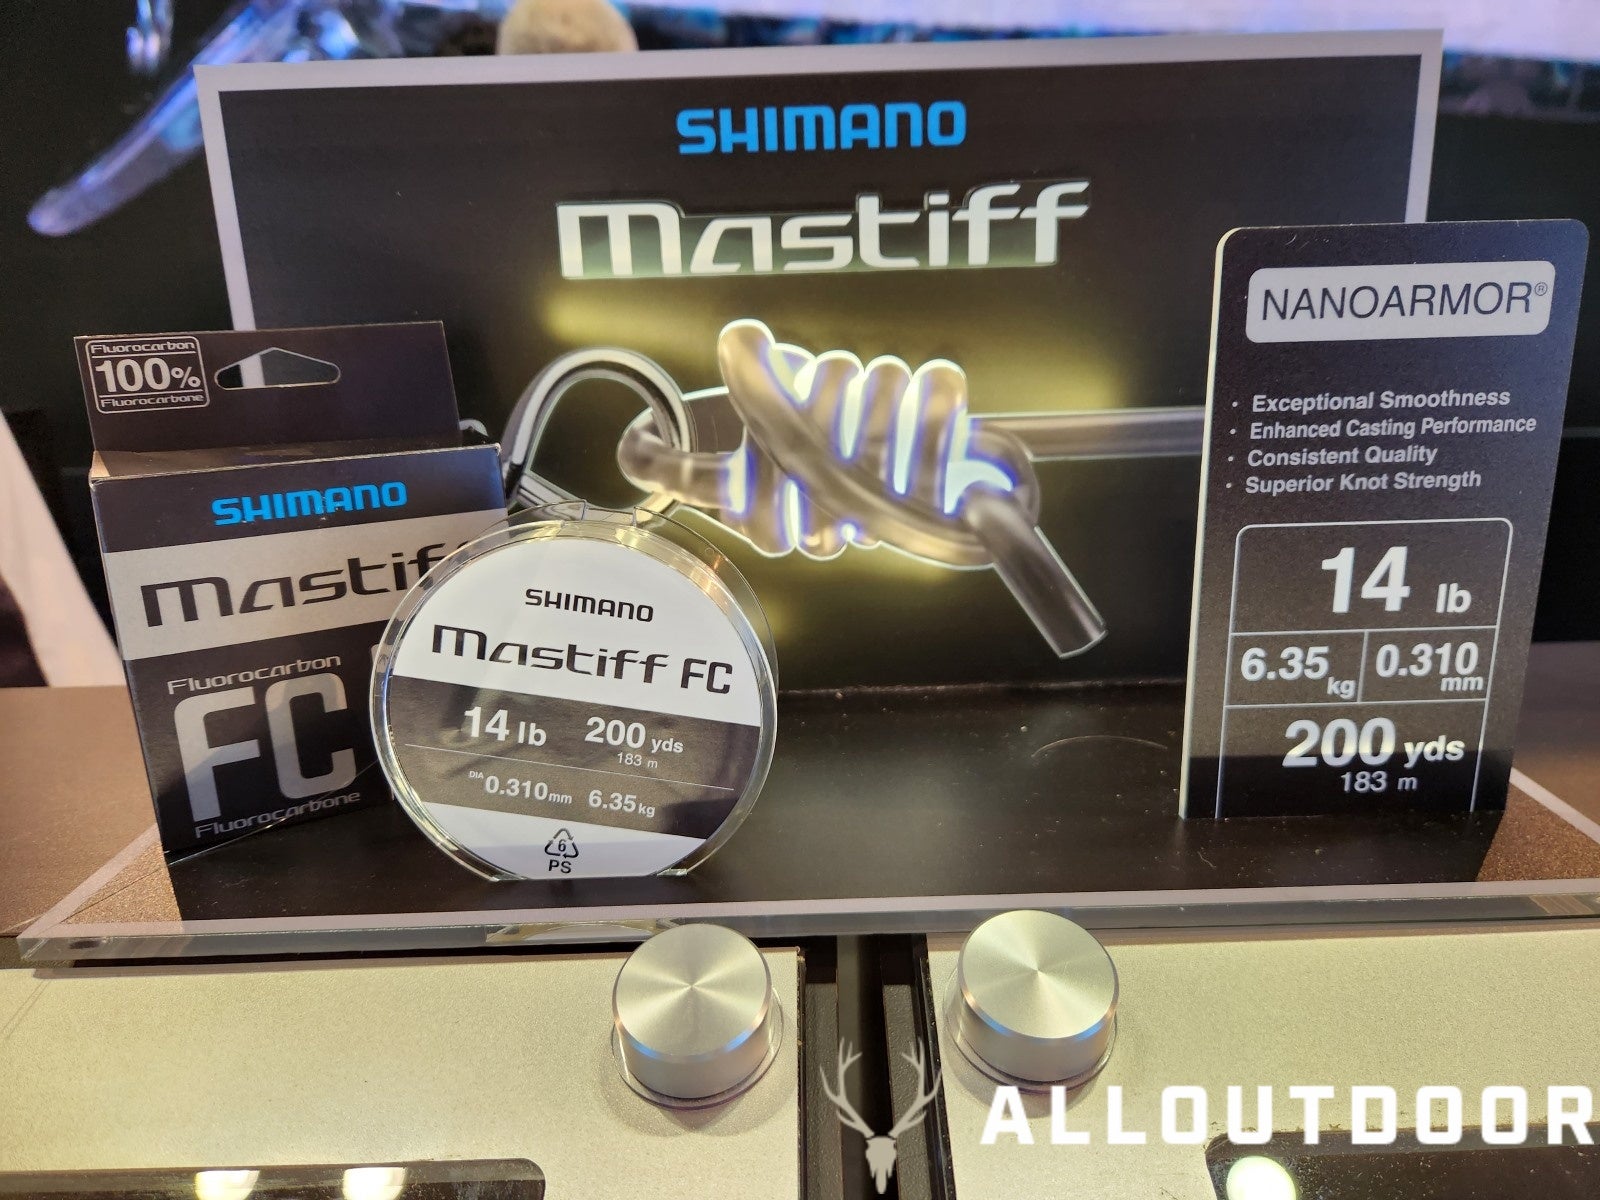 [ICAST 2023] Shimano's Mastiff FC Best in Category Fishing Line